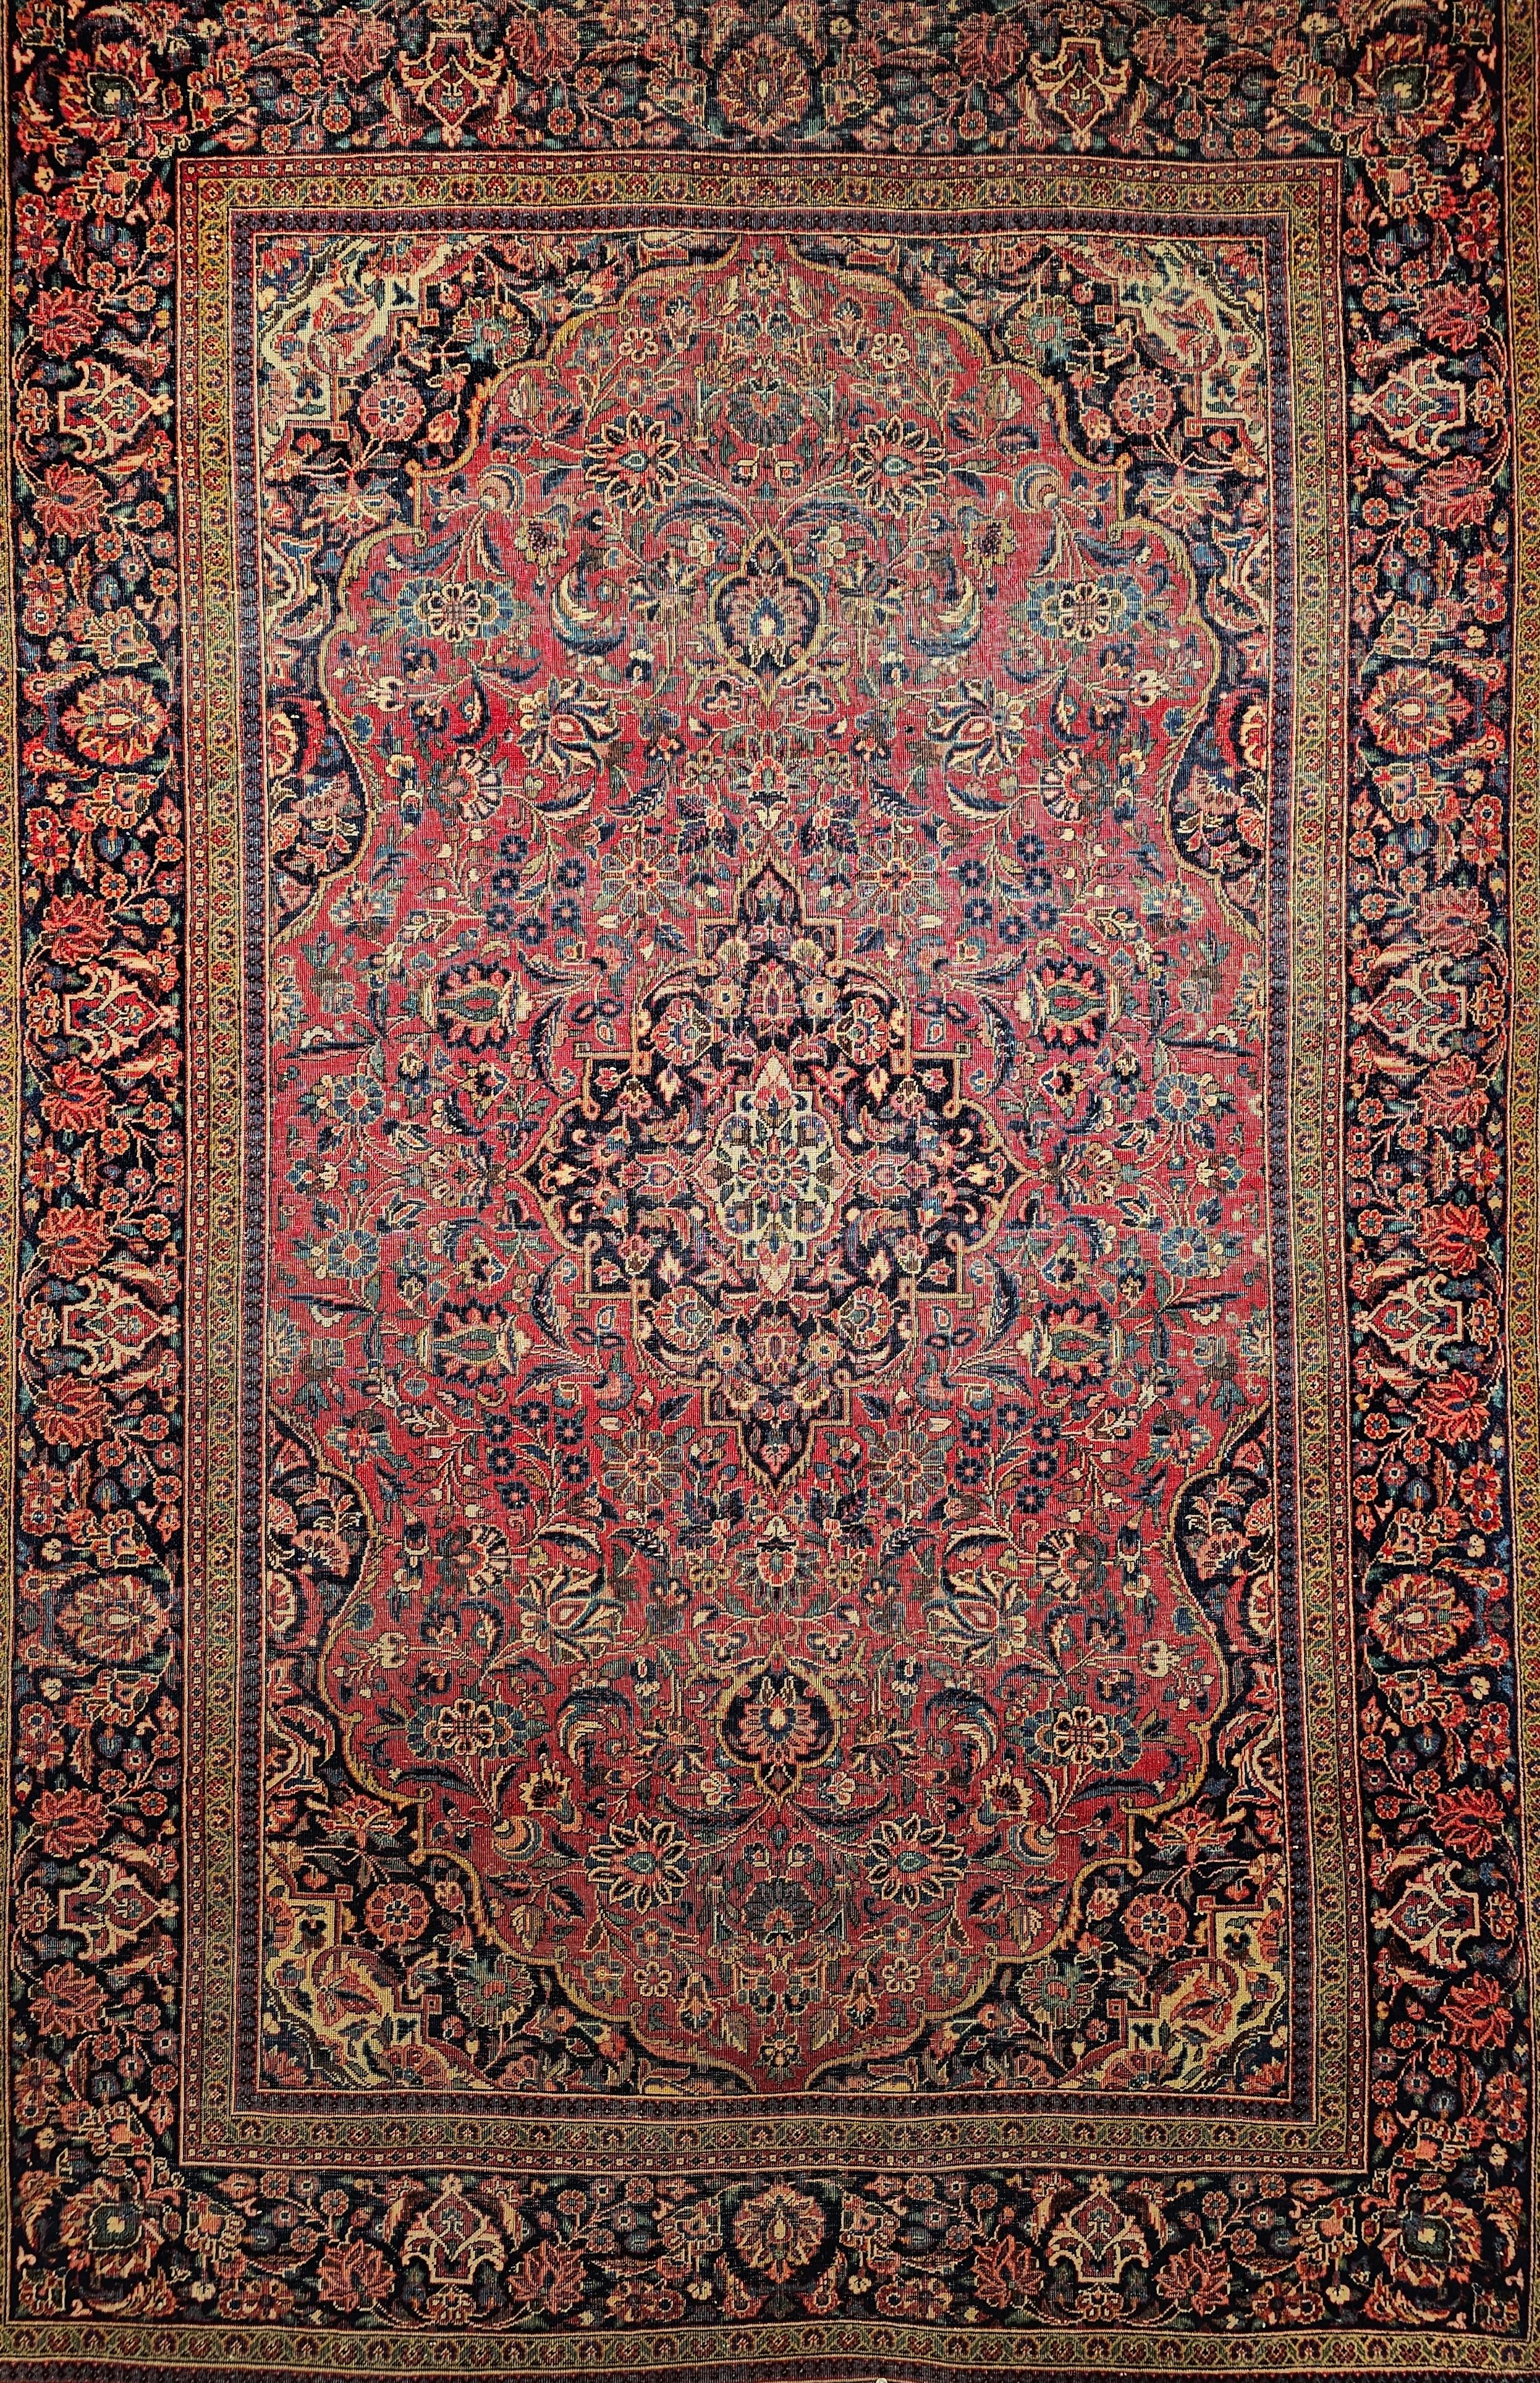 Vintage Persian Kashan area rug in Floral pattern in burgundy and navy Blue.  The classical design and luminous, resilient wool quality of this outstanding vintage Persian Kashan carpet create an impression of consummate refinement. This Kashan rug